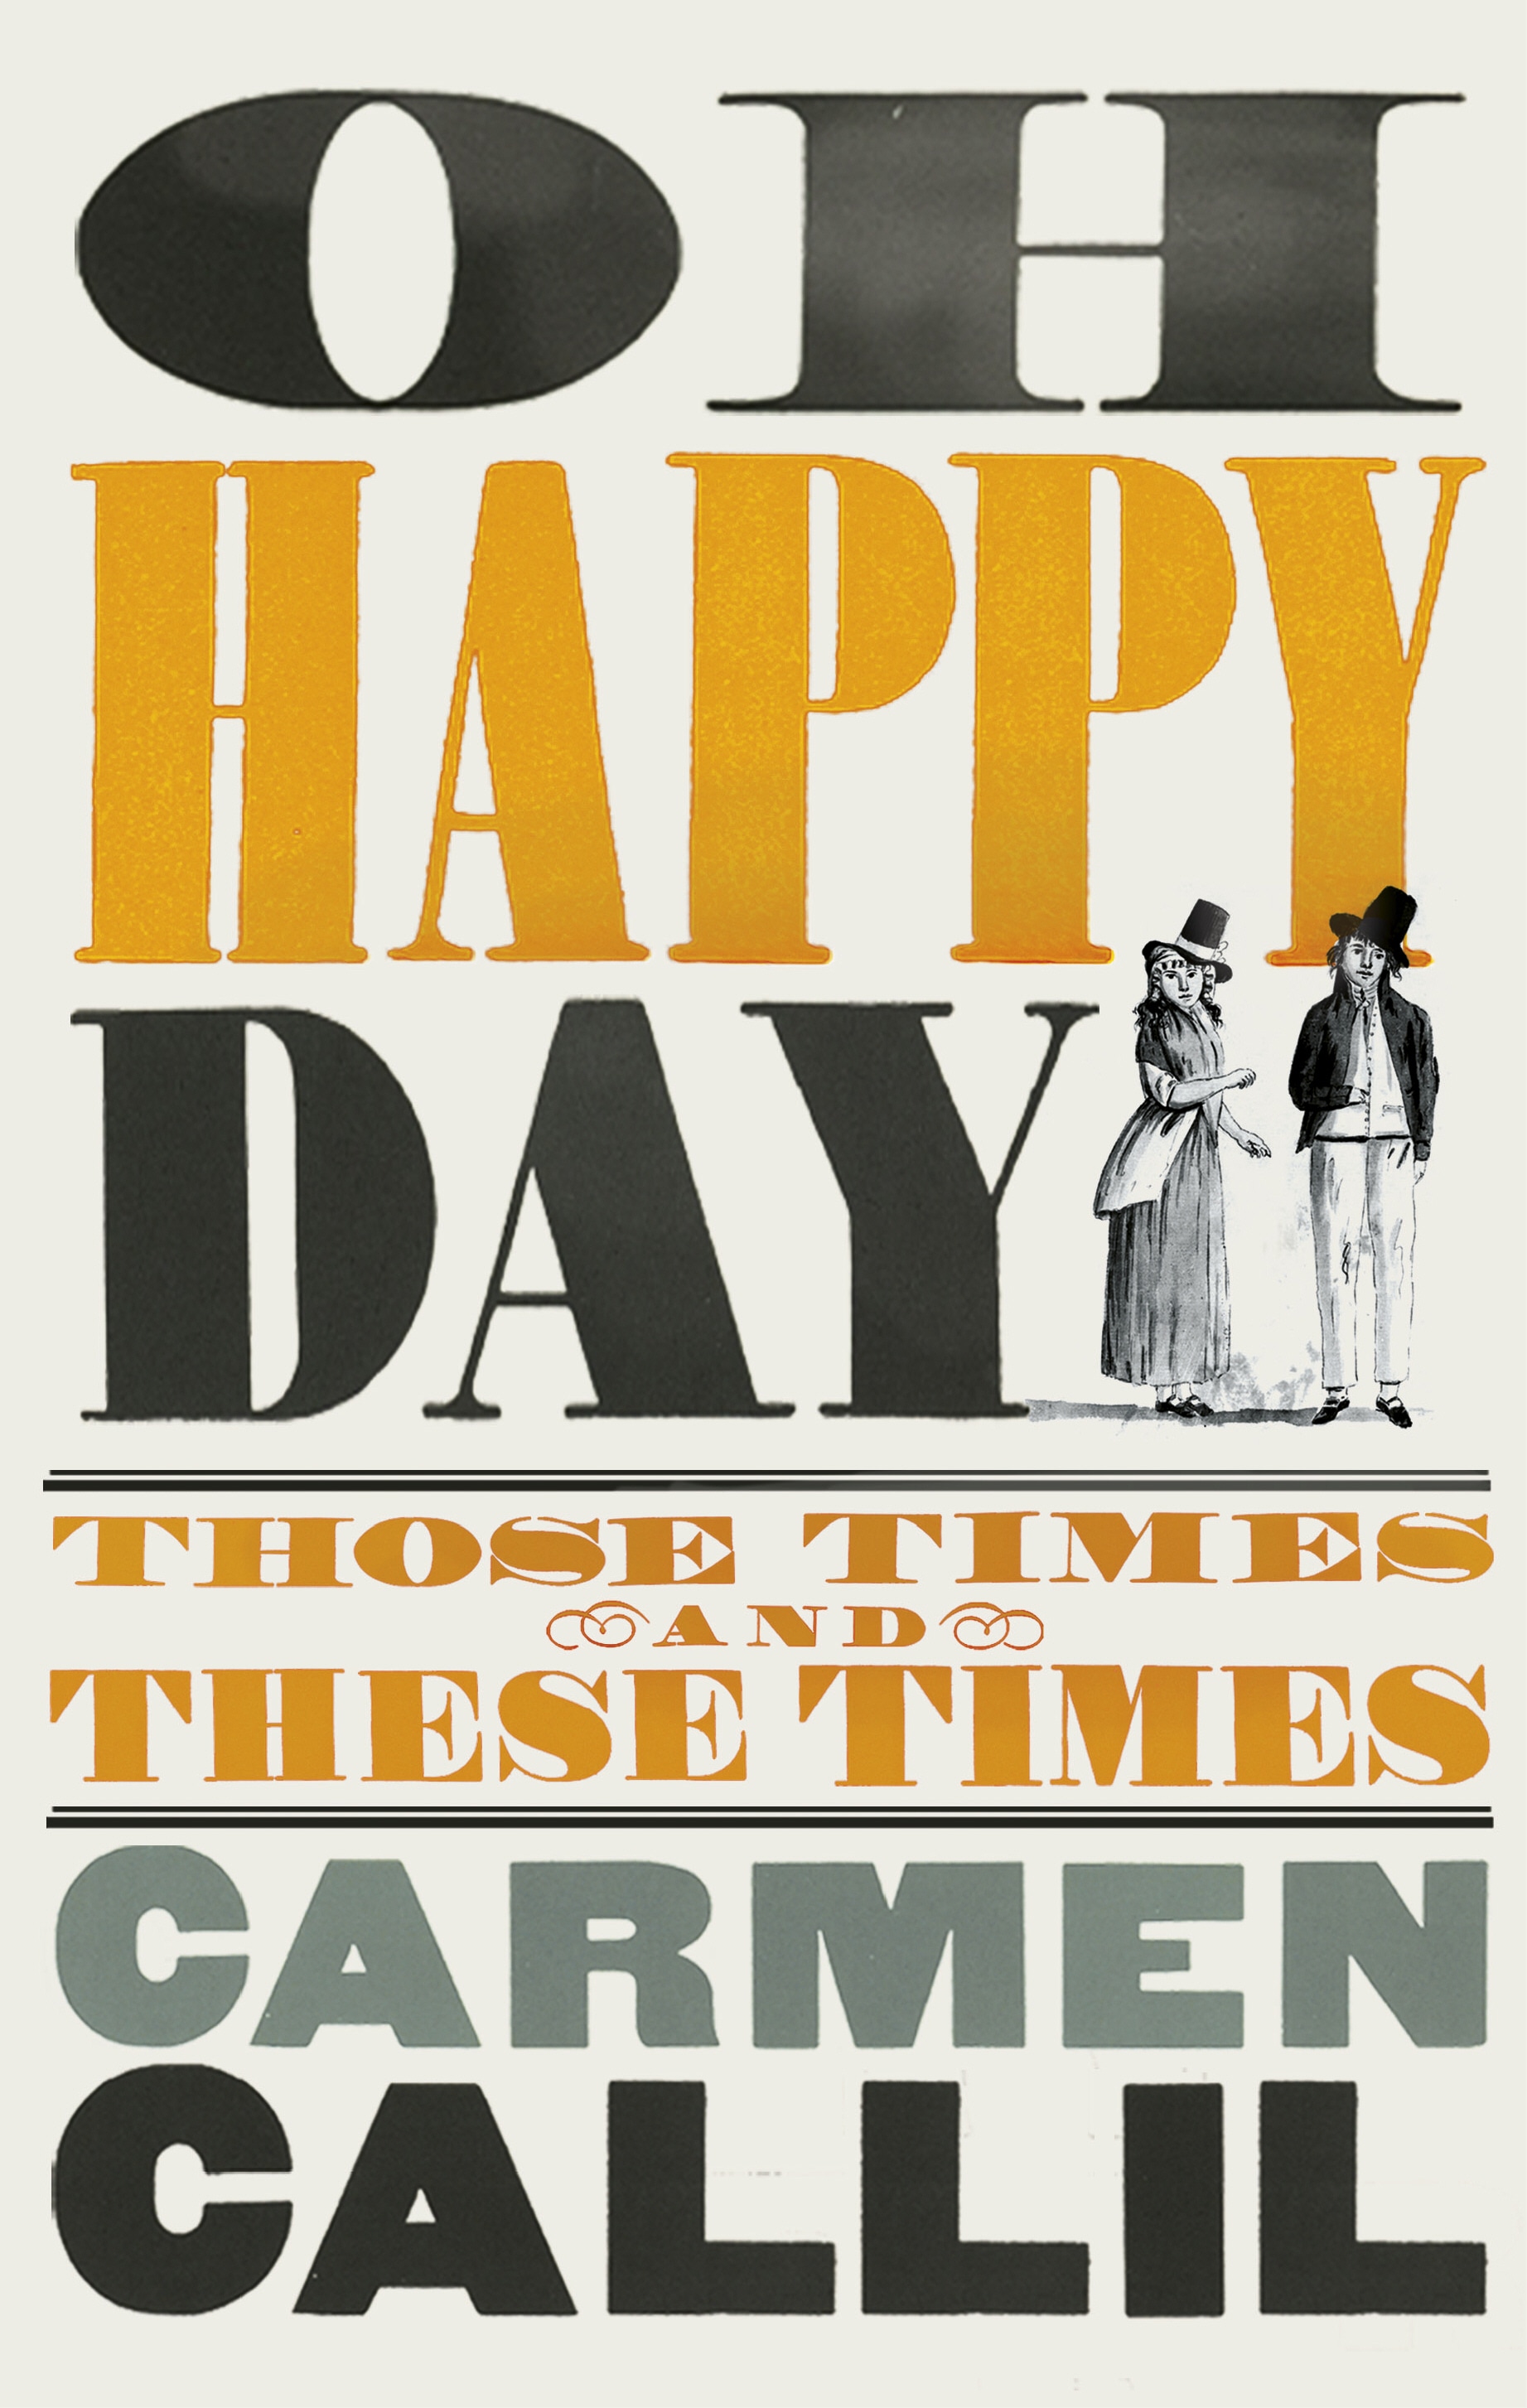 Book “Oh Happy Day” by Carmen Callil — November 5, 2020